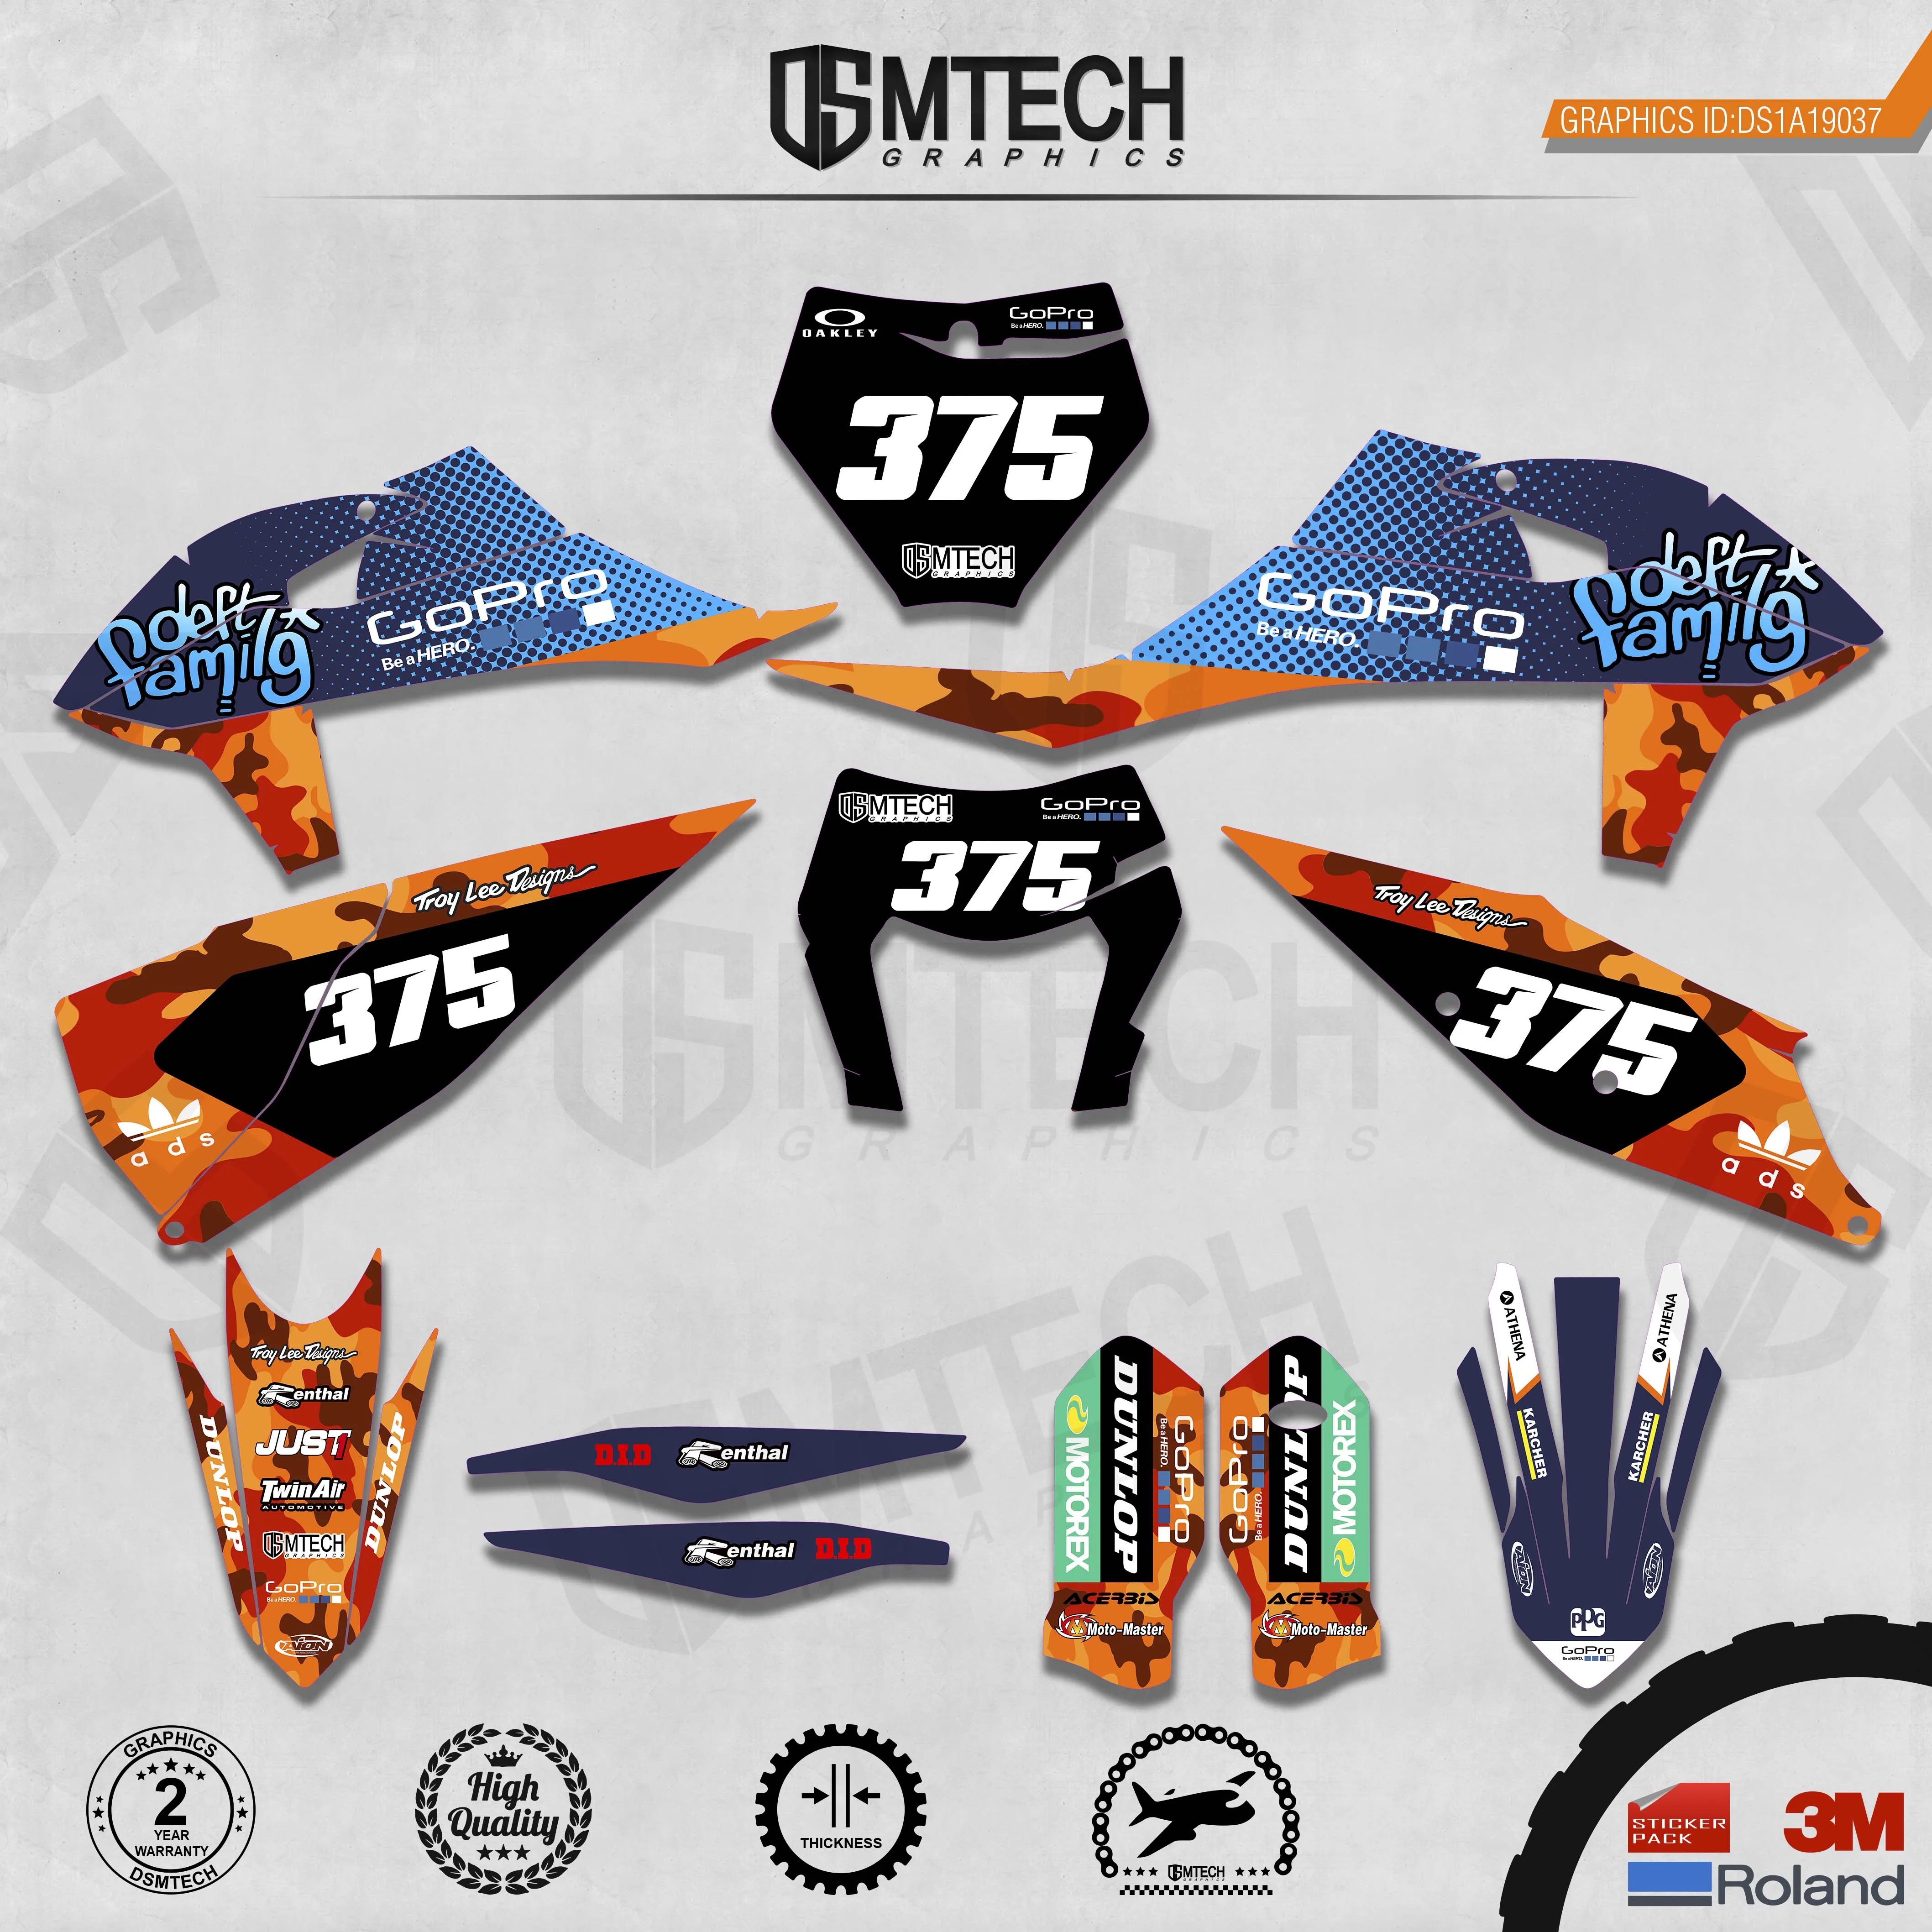 DSMTECH Customized Team Graphics Backgrounds Decals 3M Custom Stickers For 2019-2020 SXF 2020-2021EXC 037